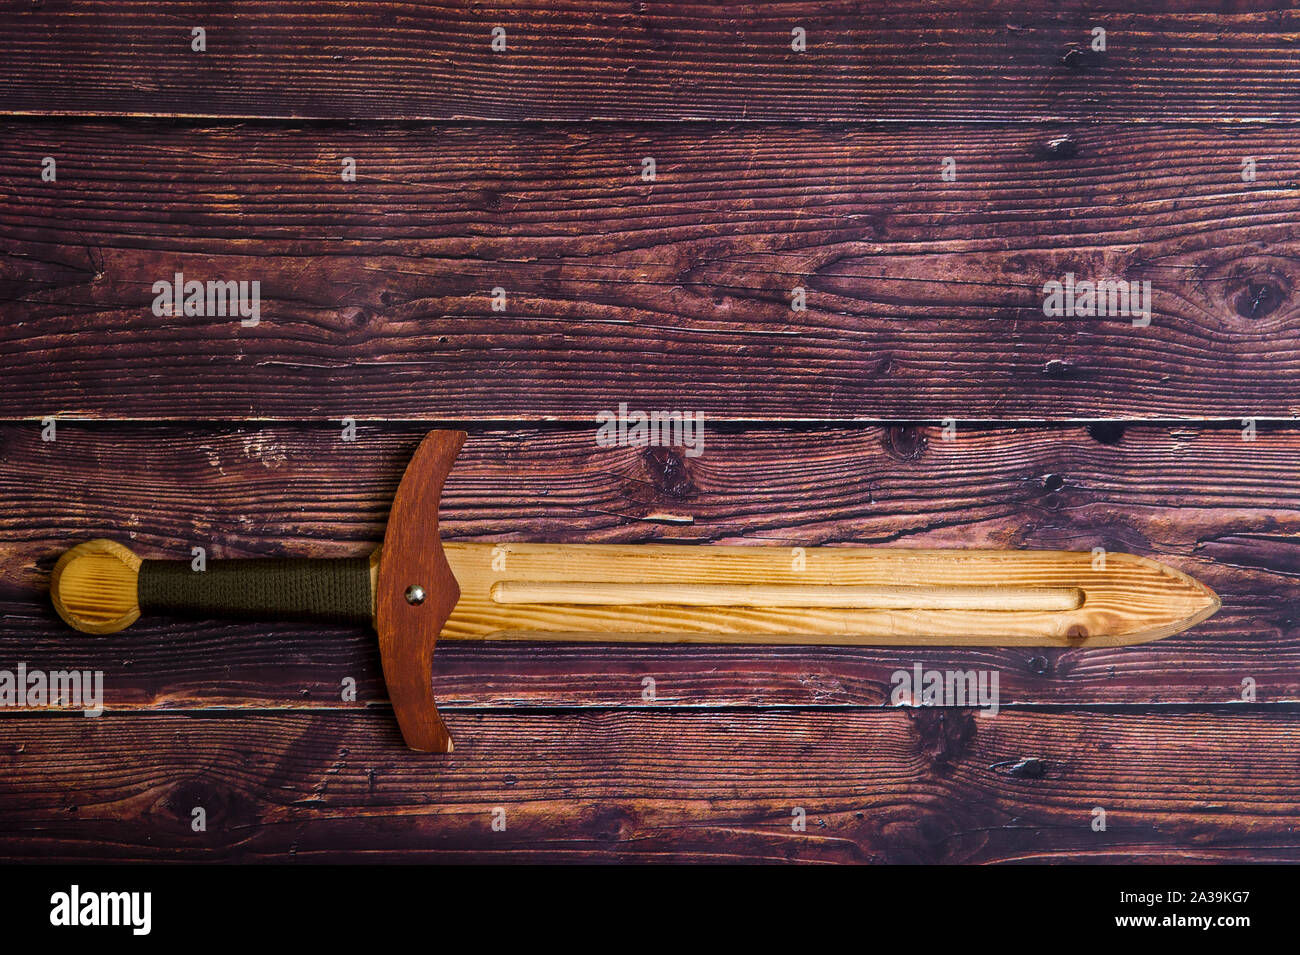 handmade wooden training toy sword on the table Stock Photo